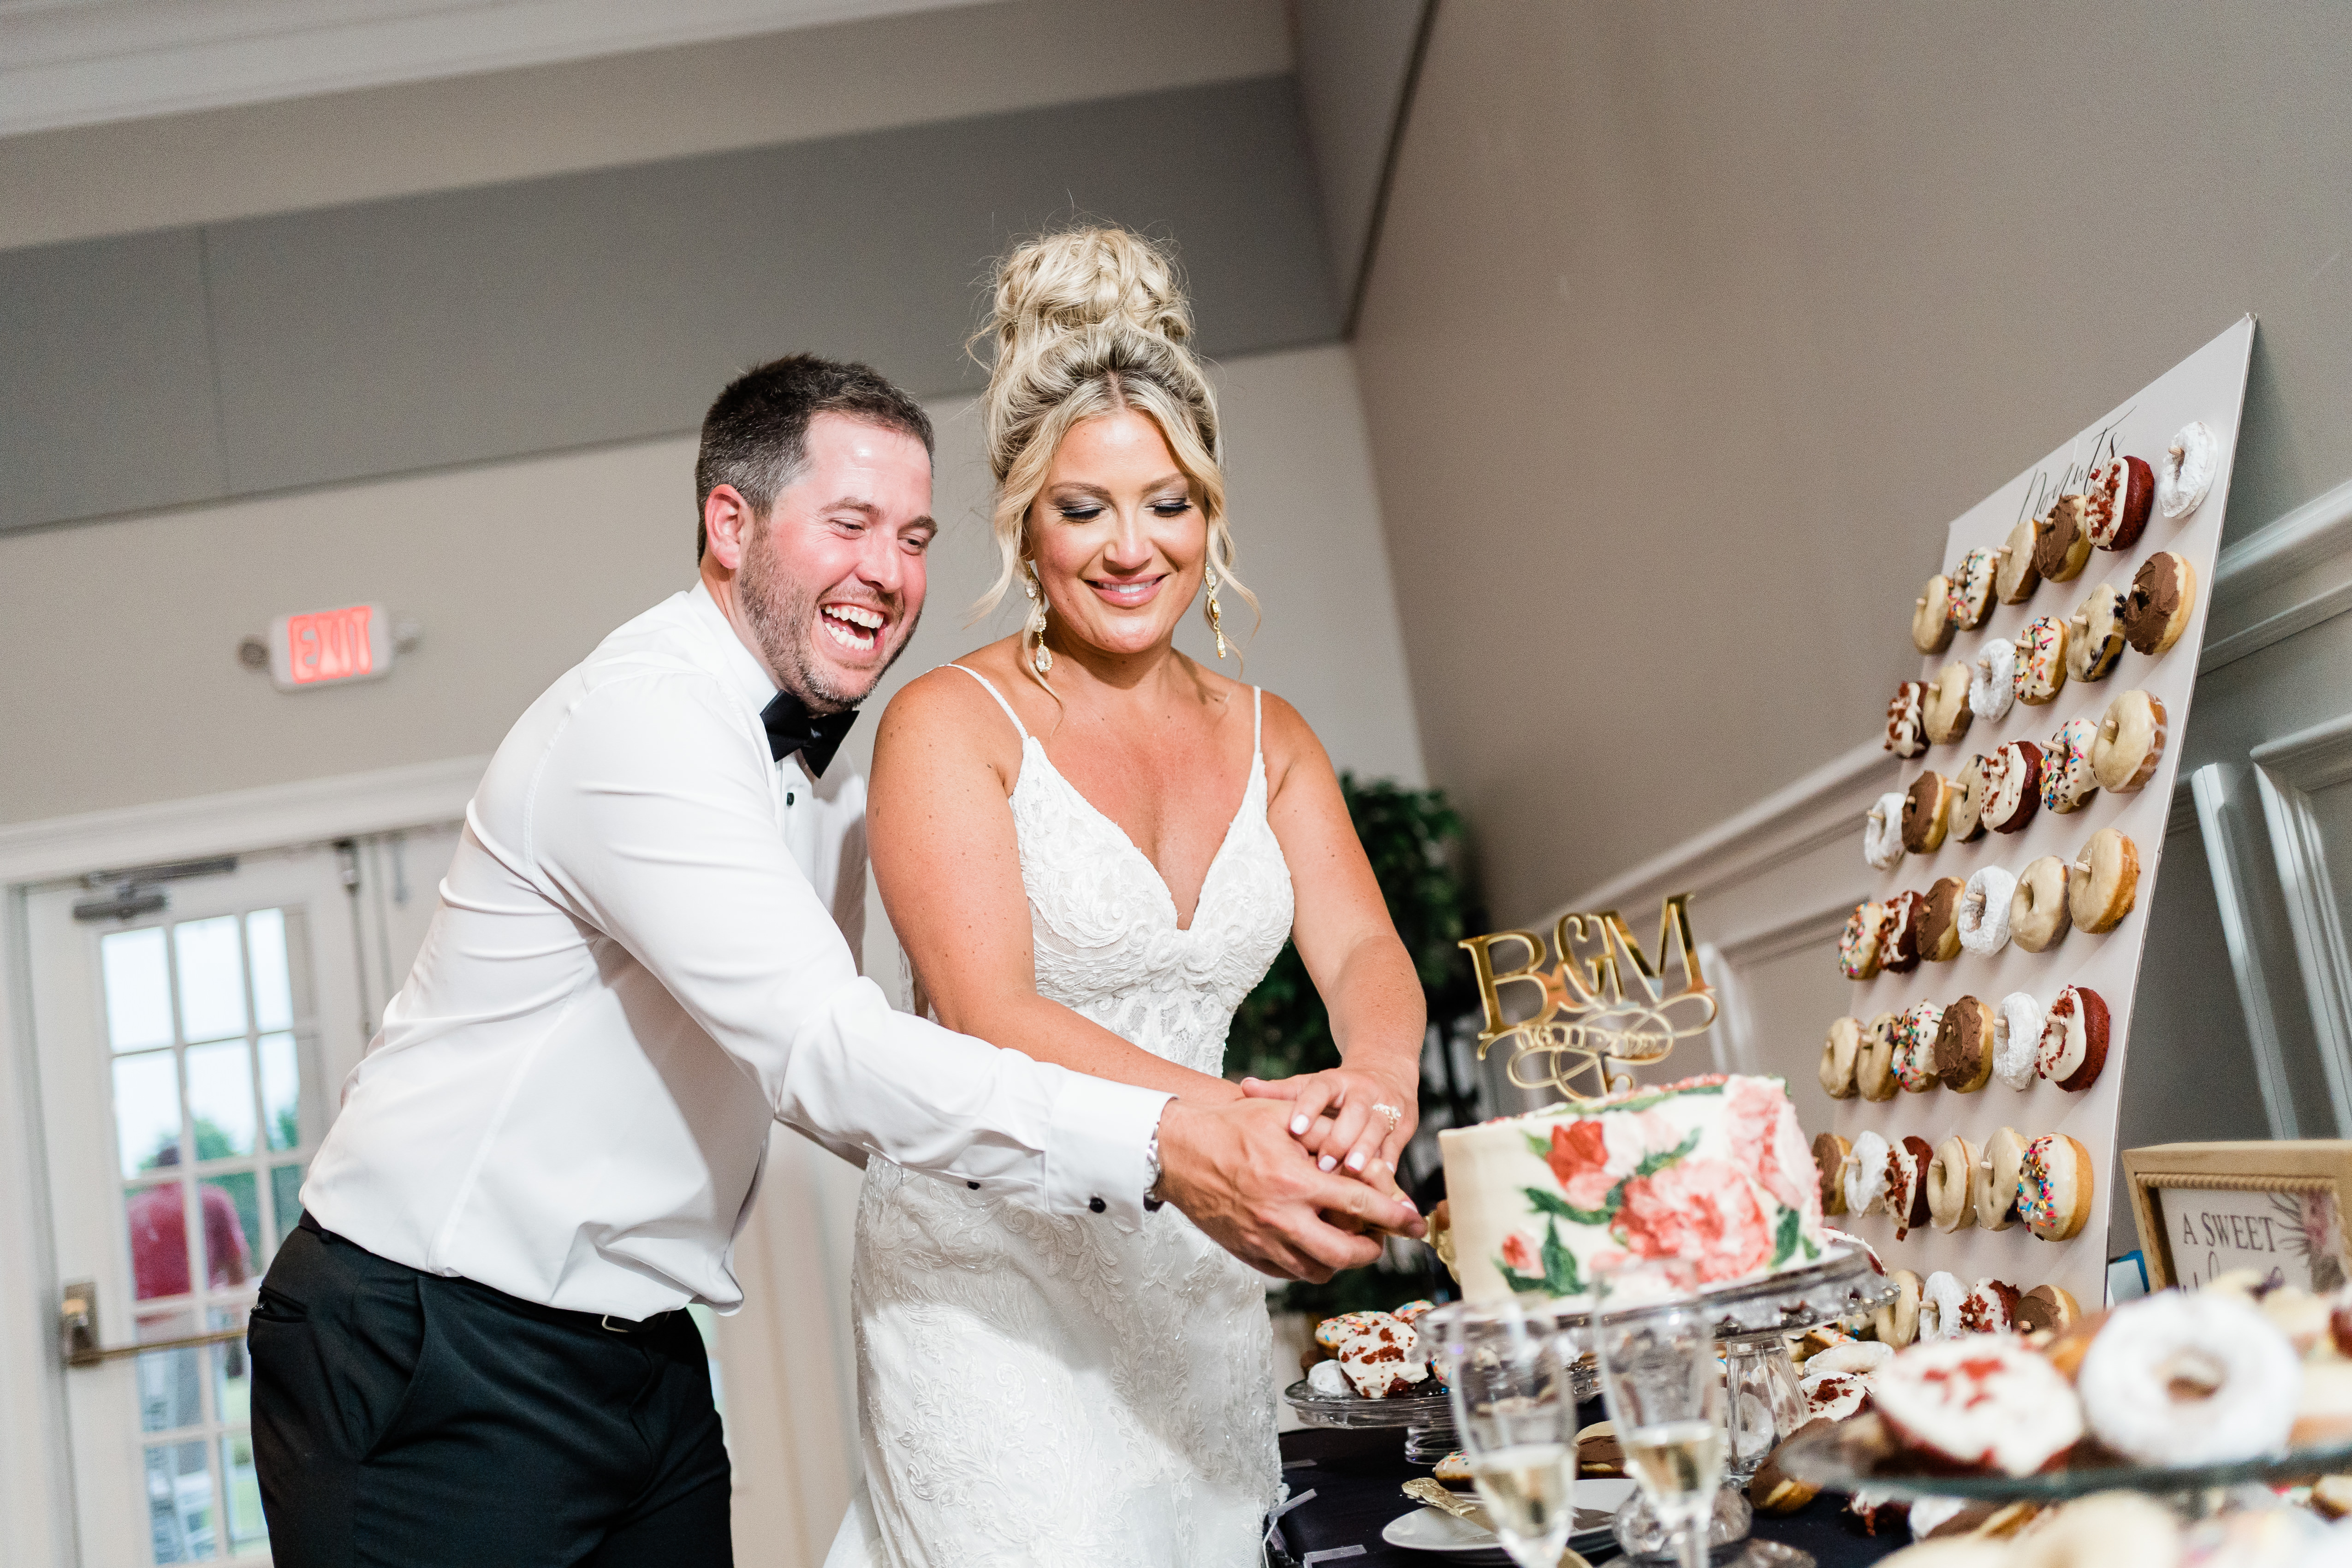 Fort Wayne wedding photographers capture bride and groom cutting cake as husband and wife